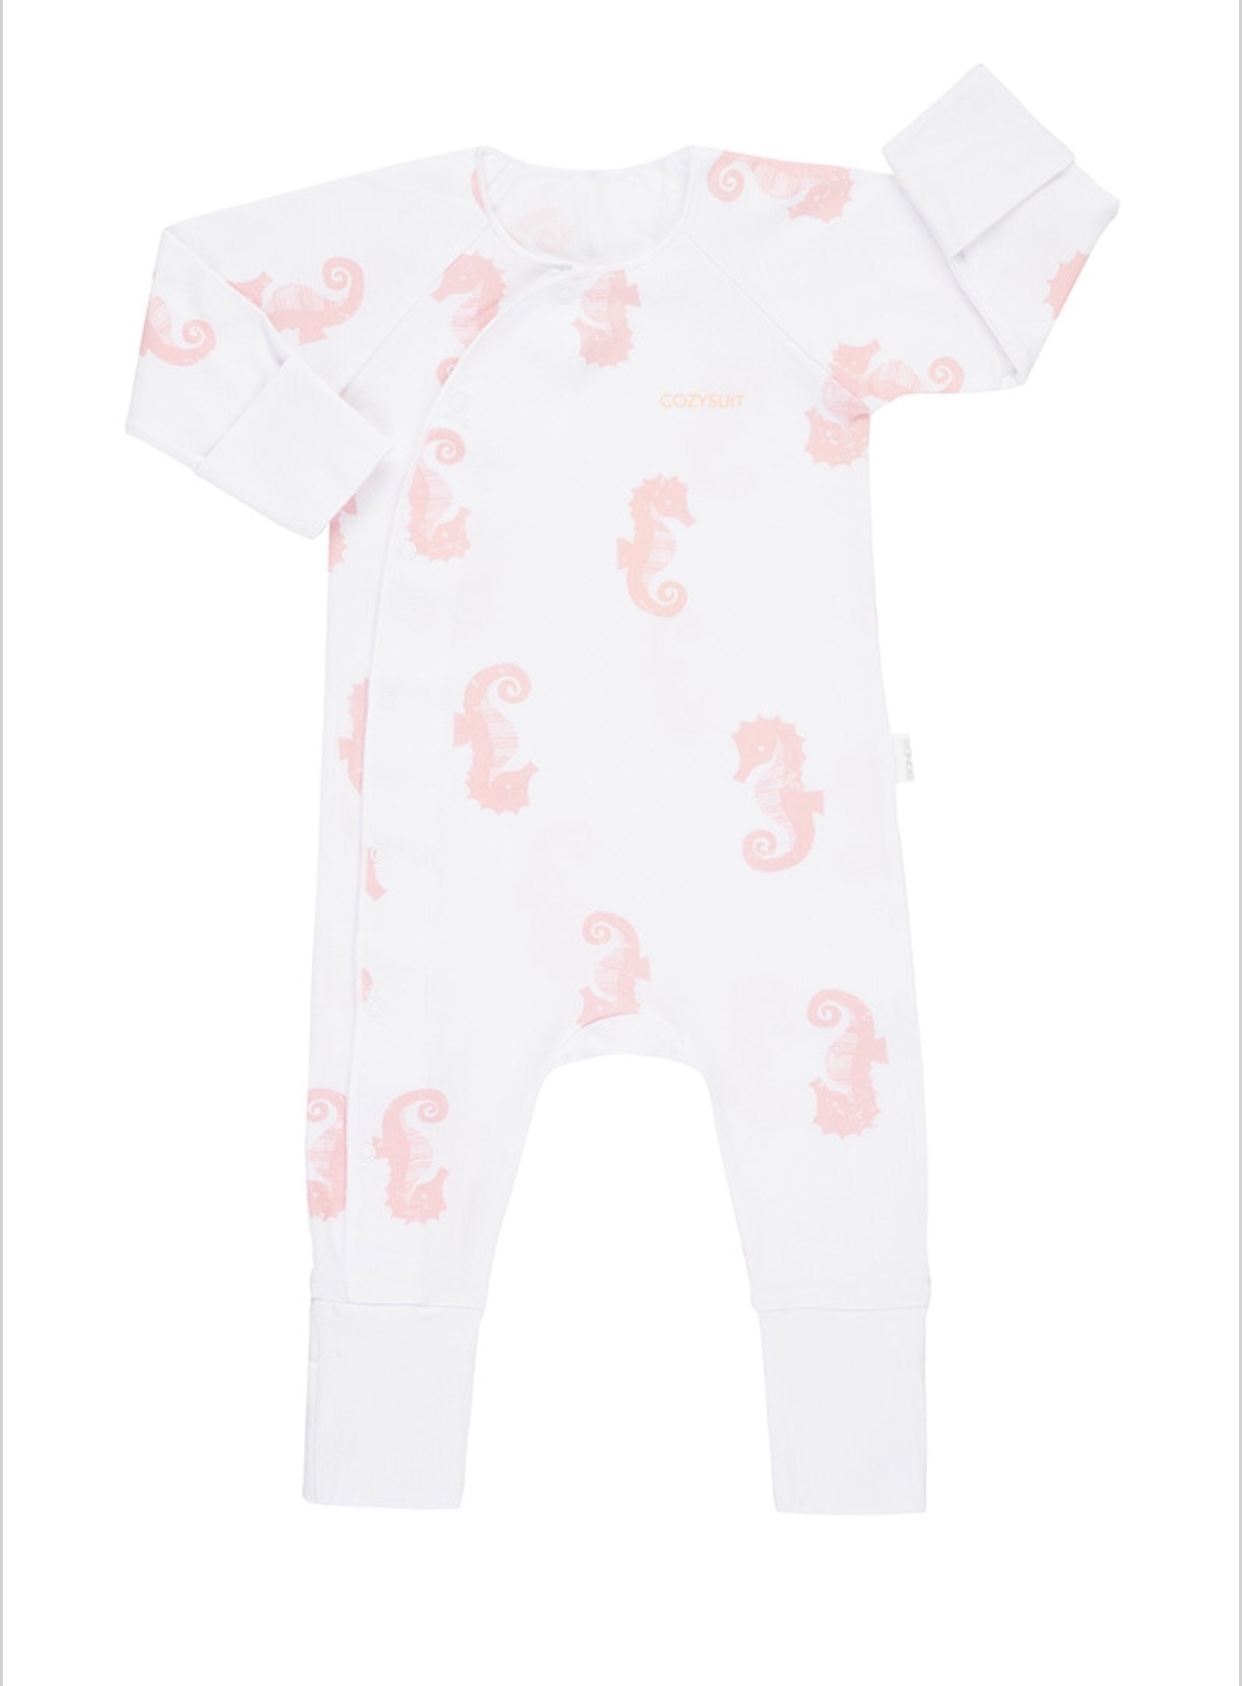 Onesies- multiple sizes and styles